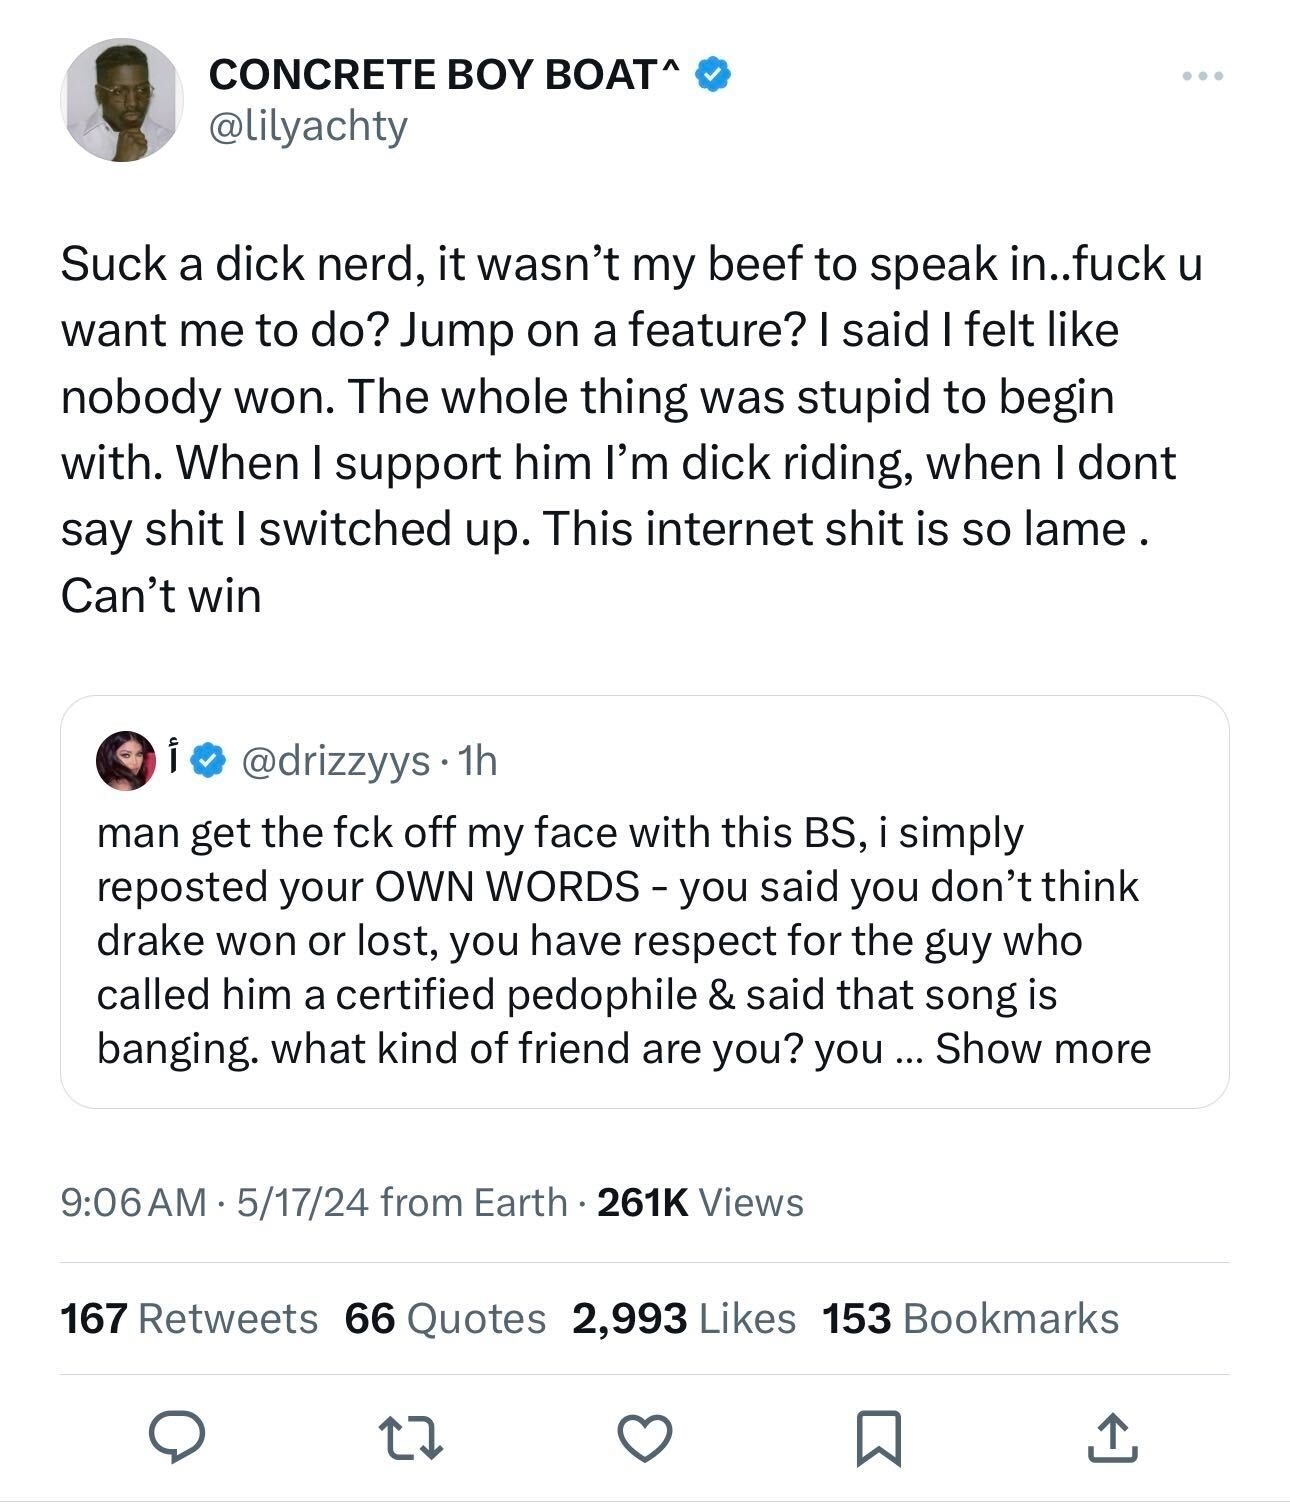 A Twitter exchange between Lil Yachty and Drake. Lil Yachty criticizes someone for their behavior, and Drake responds by calling out hypocrisy in Lil Yachty&#x27;s statements